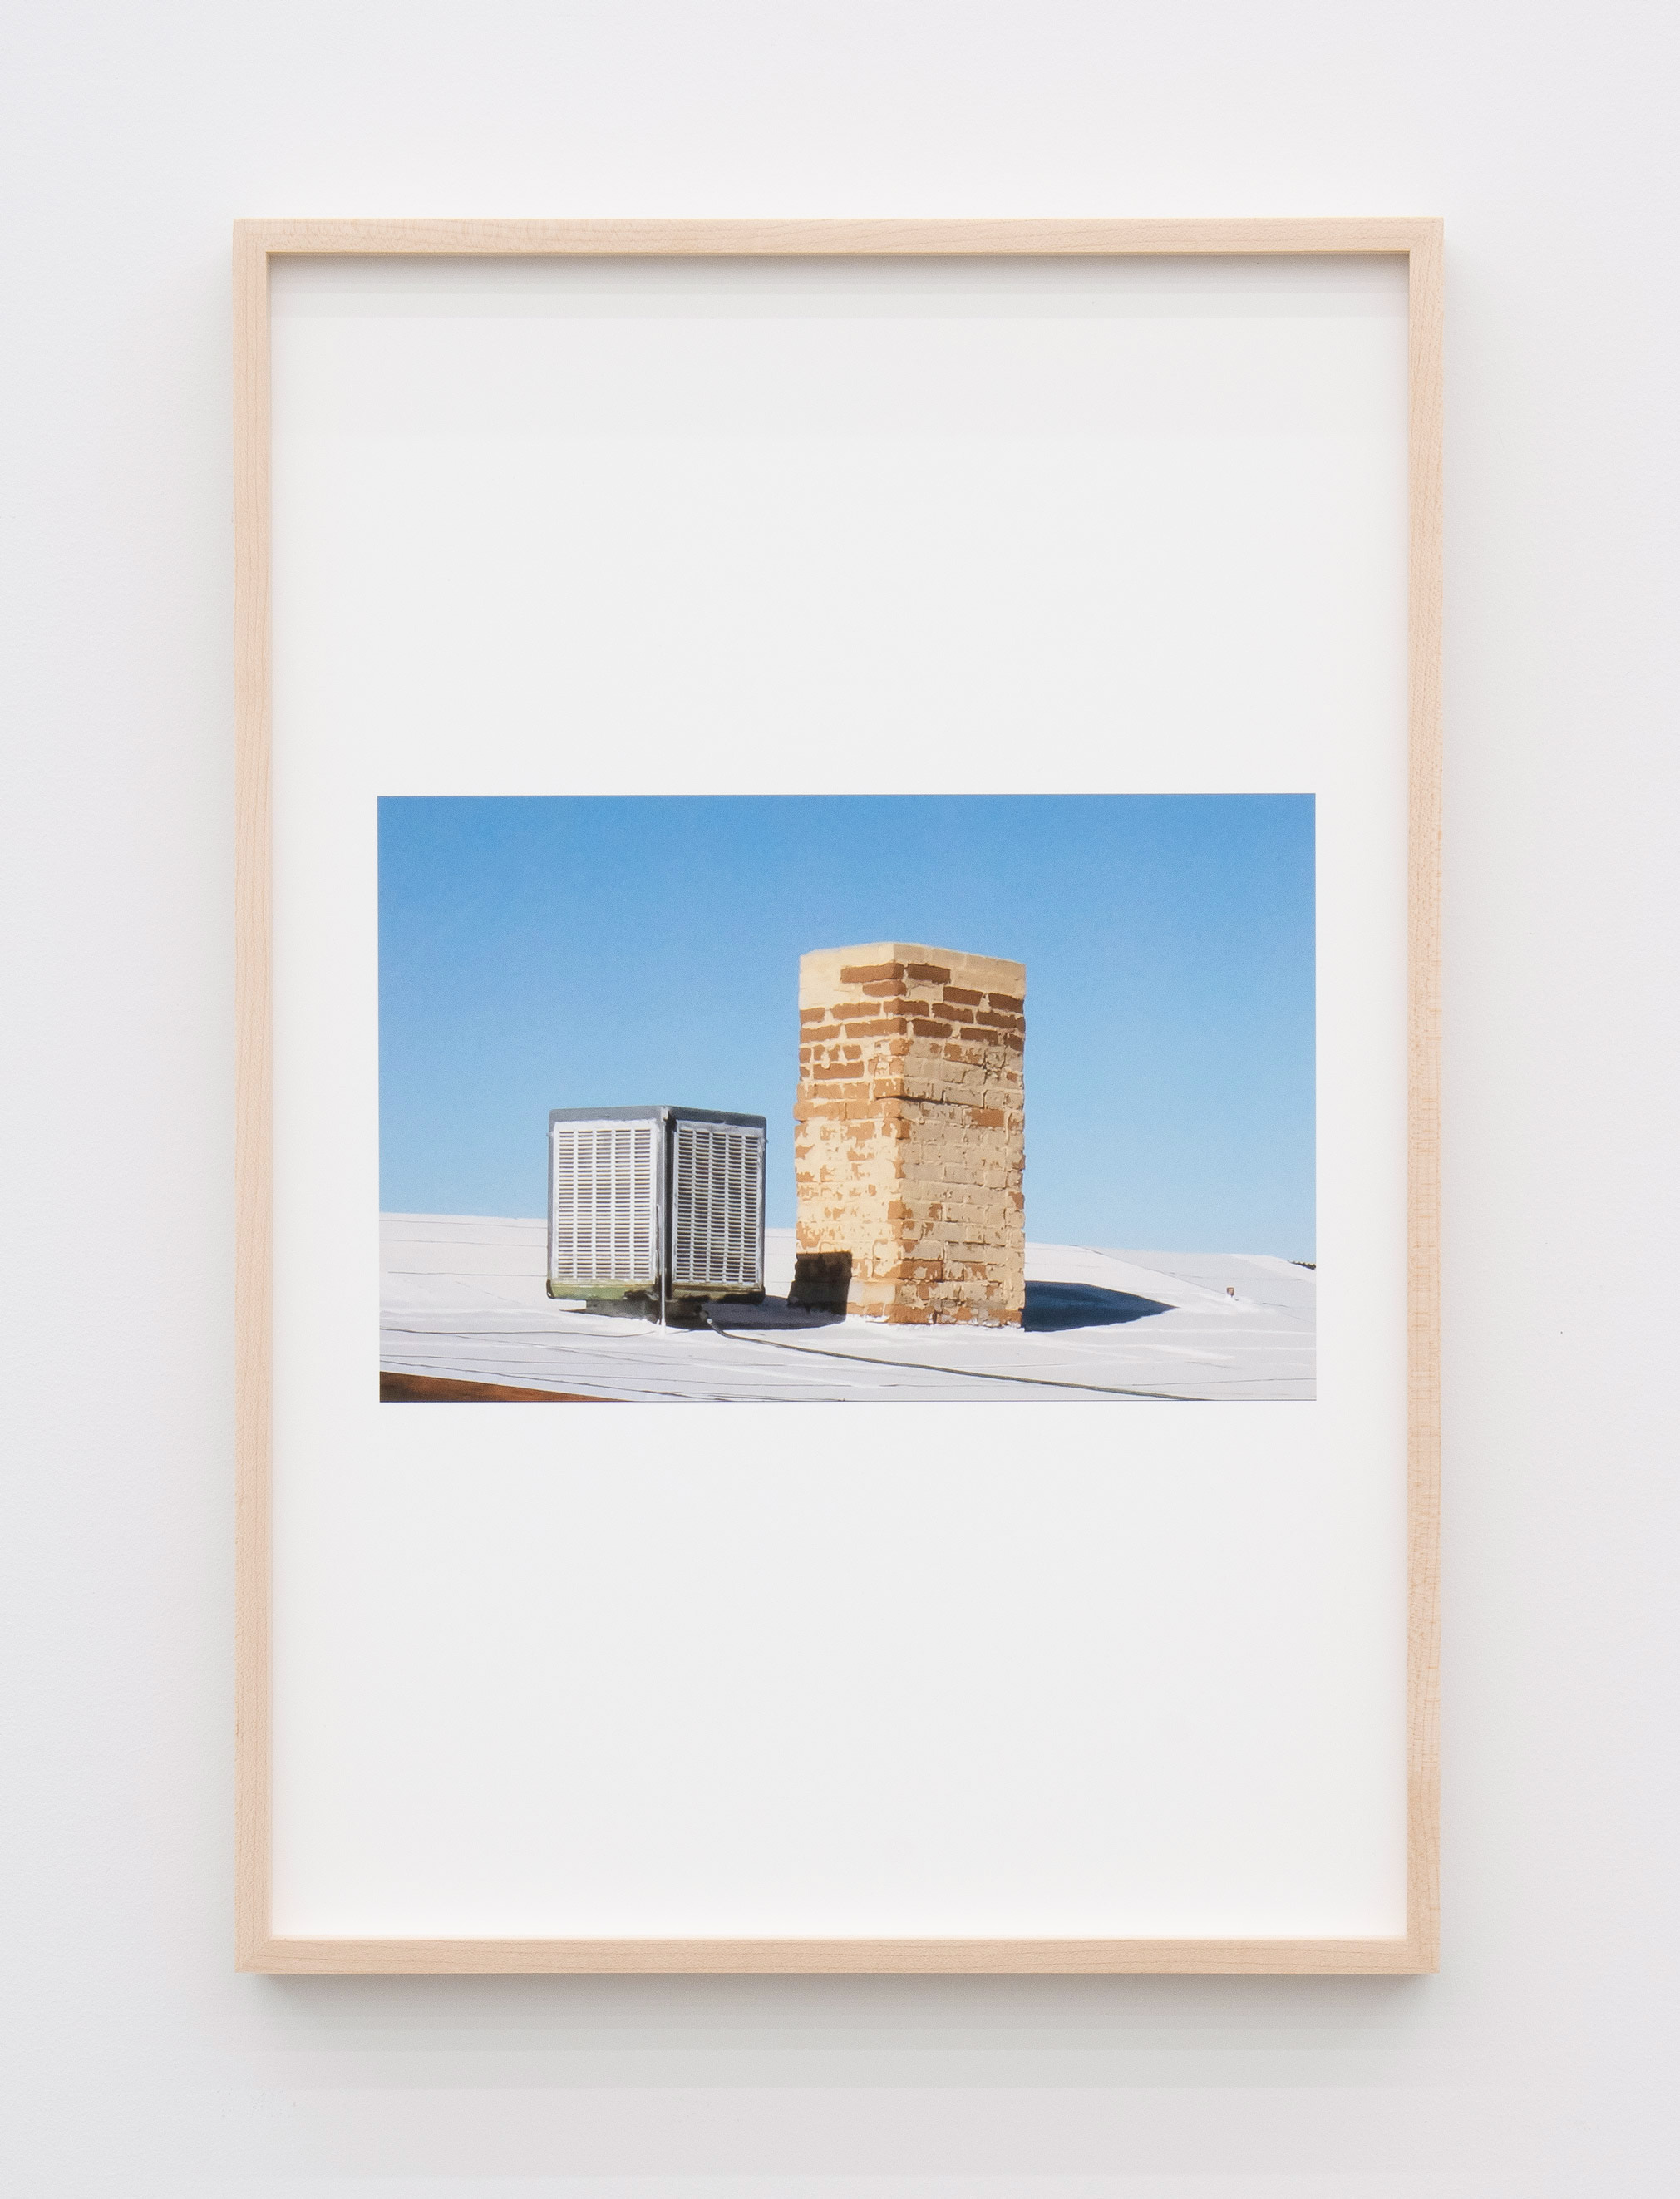 Jennifer Bolande, Rooftop, 2023, Archival pigment print, 19 x 13 in.